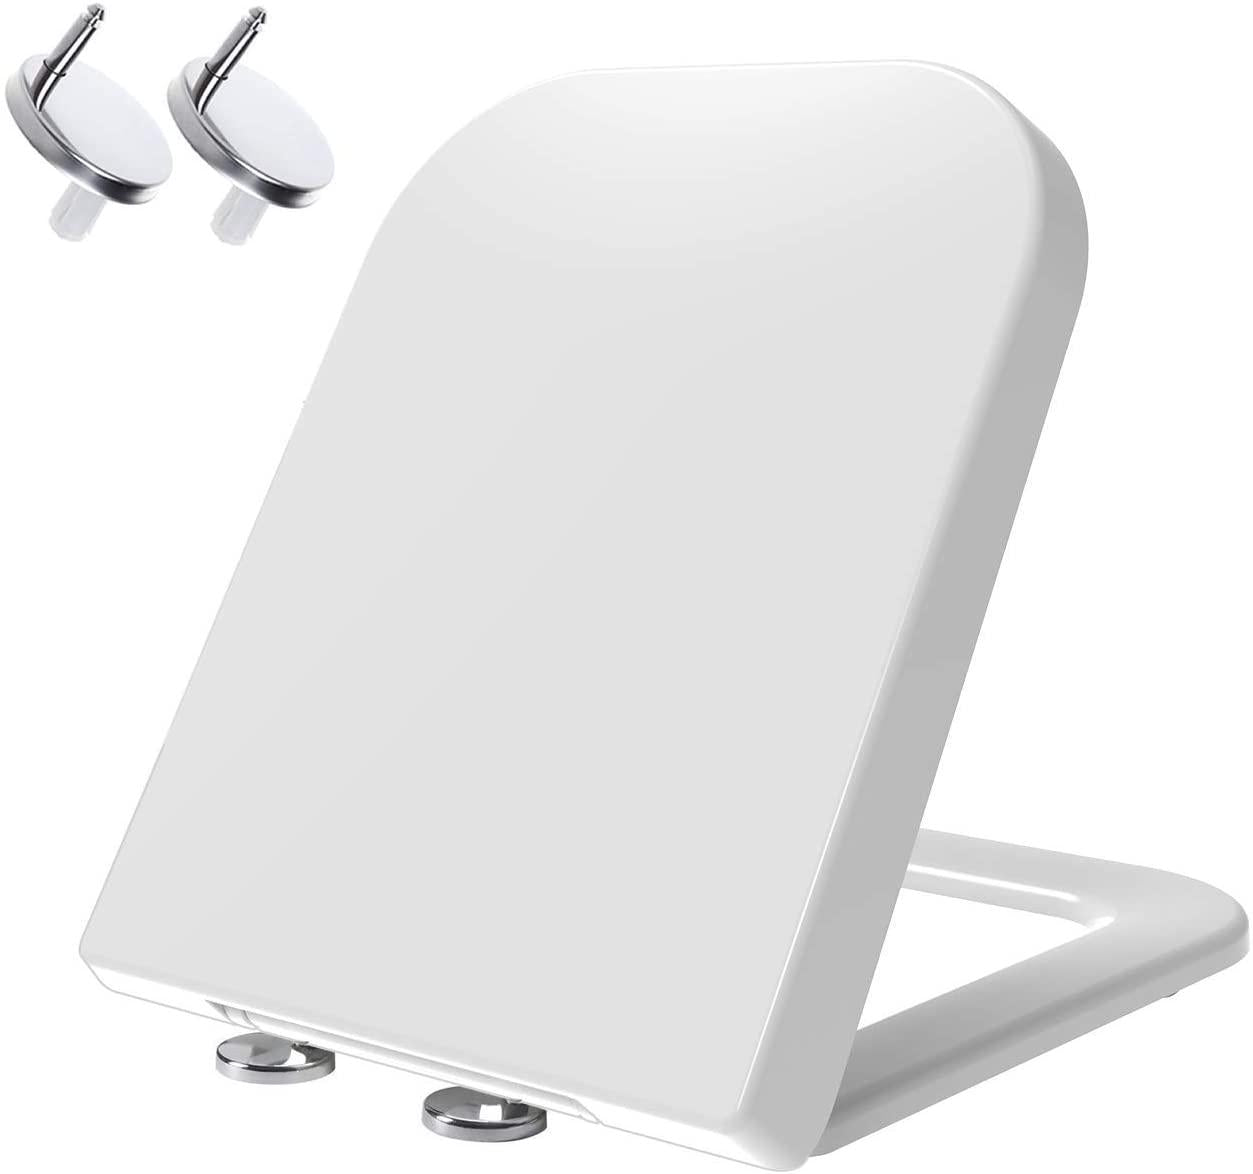 MASS DYNAMIC, MASS DYNAMIC Square Toilet Seat, Soft Close Toilet Seat White with Quick Release, Top Fix 360 Adjustable Hinges, White Duroplast Loo Seat (Heavy Duty)